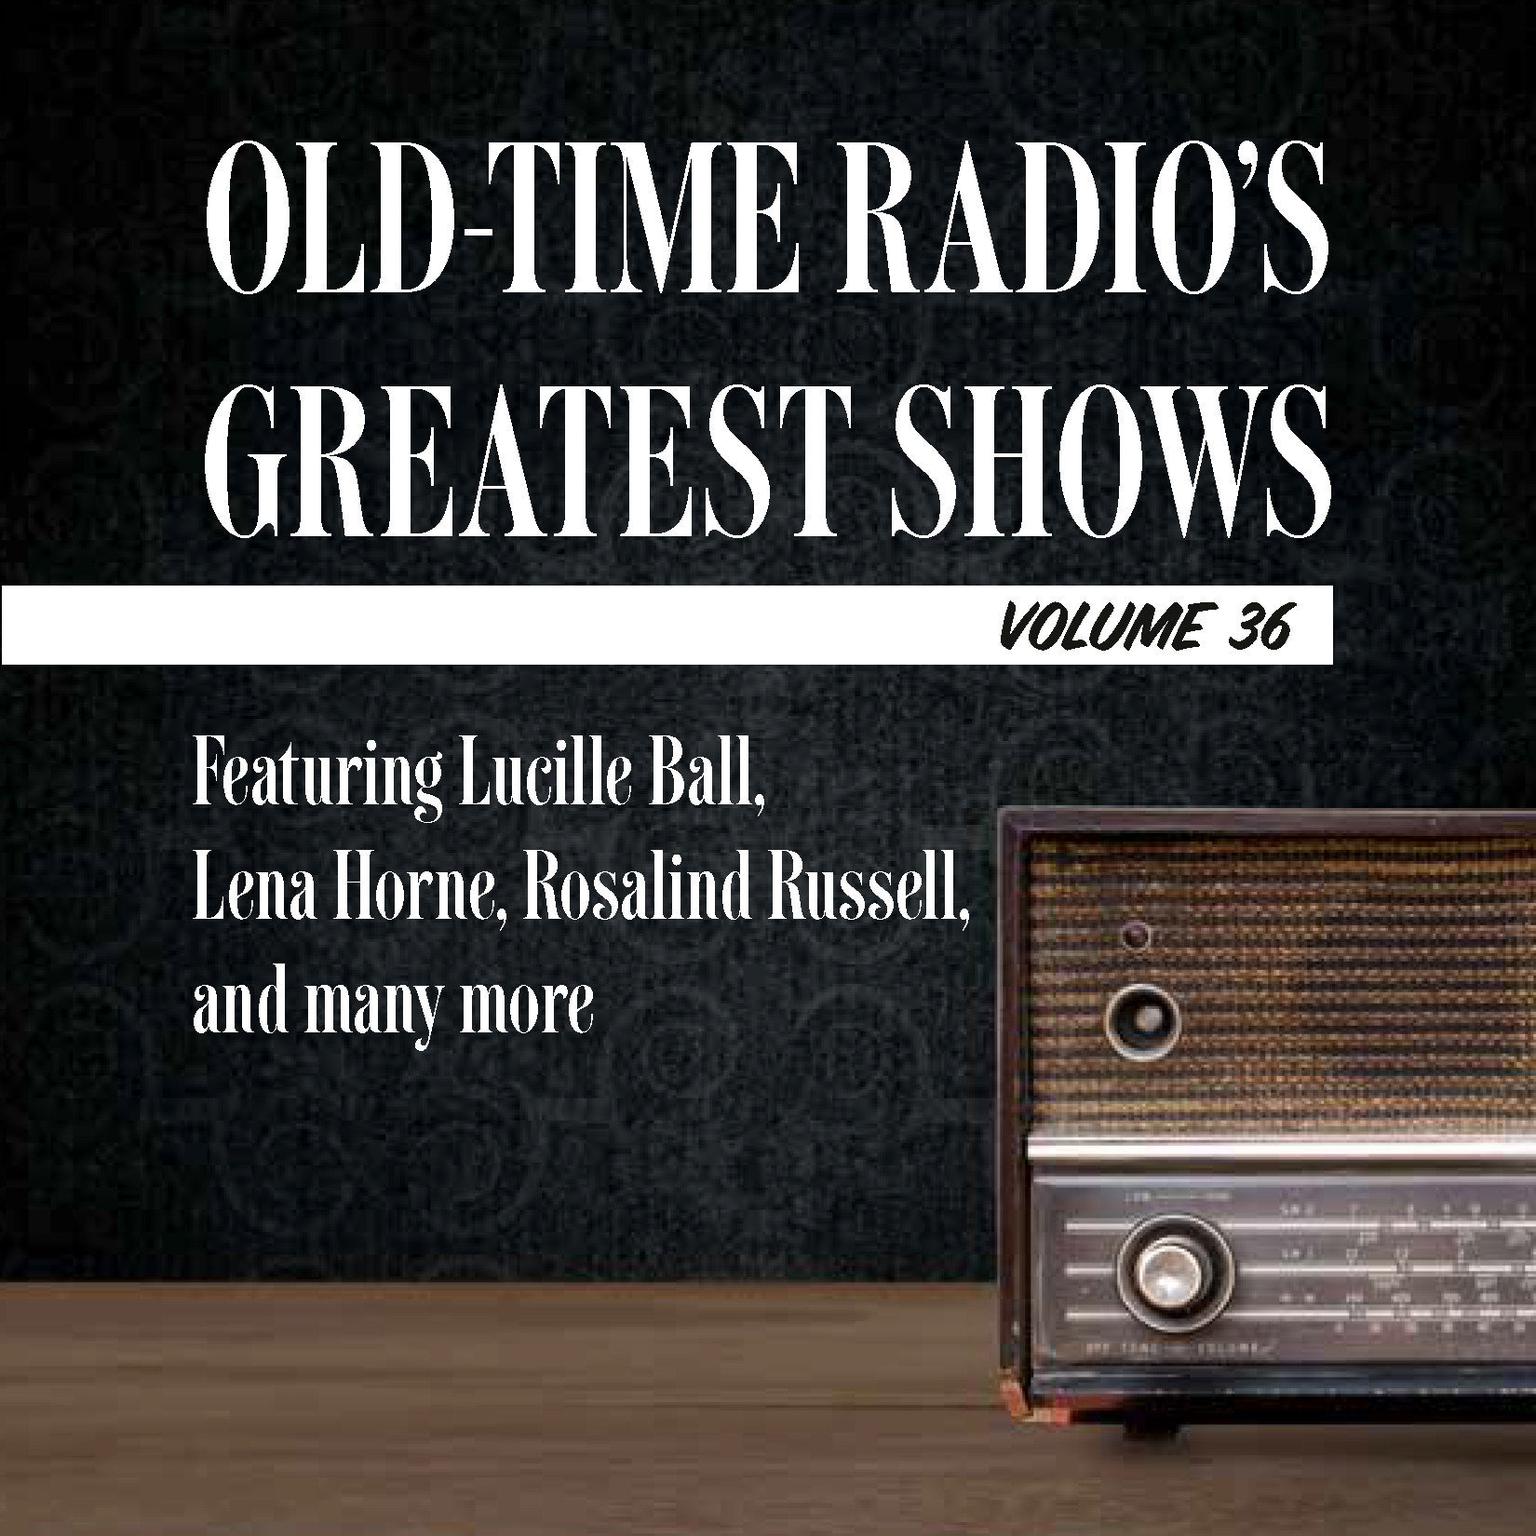 Old-Time Radios Greatest Shows, Volume 36: Featuring Lucille Ball, Lena Horne, Rosalind Russell, and many more Audiobook, by Carl Amari